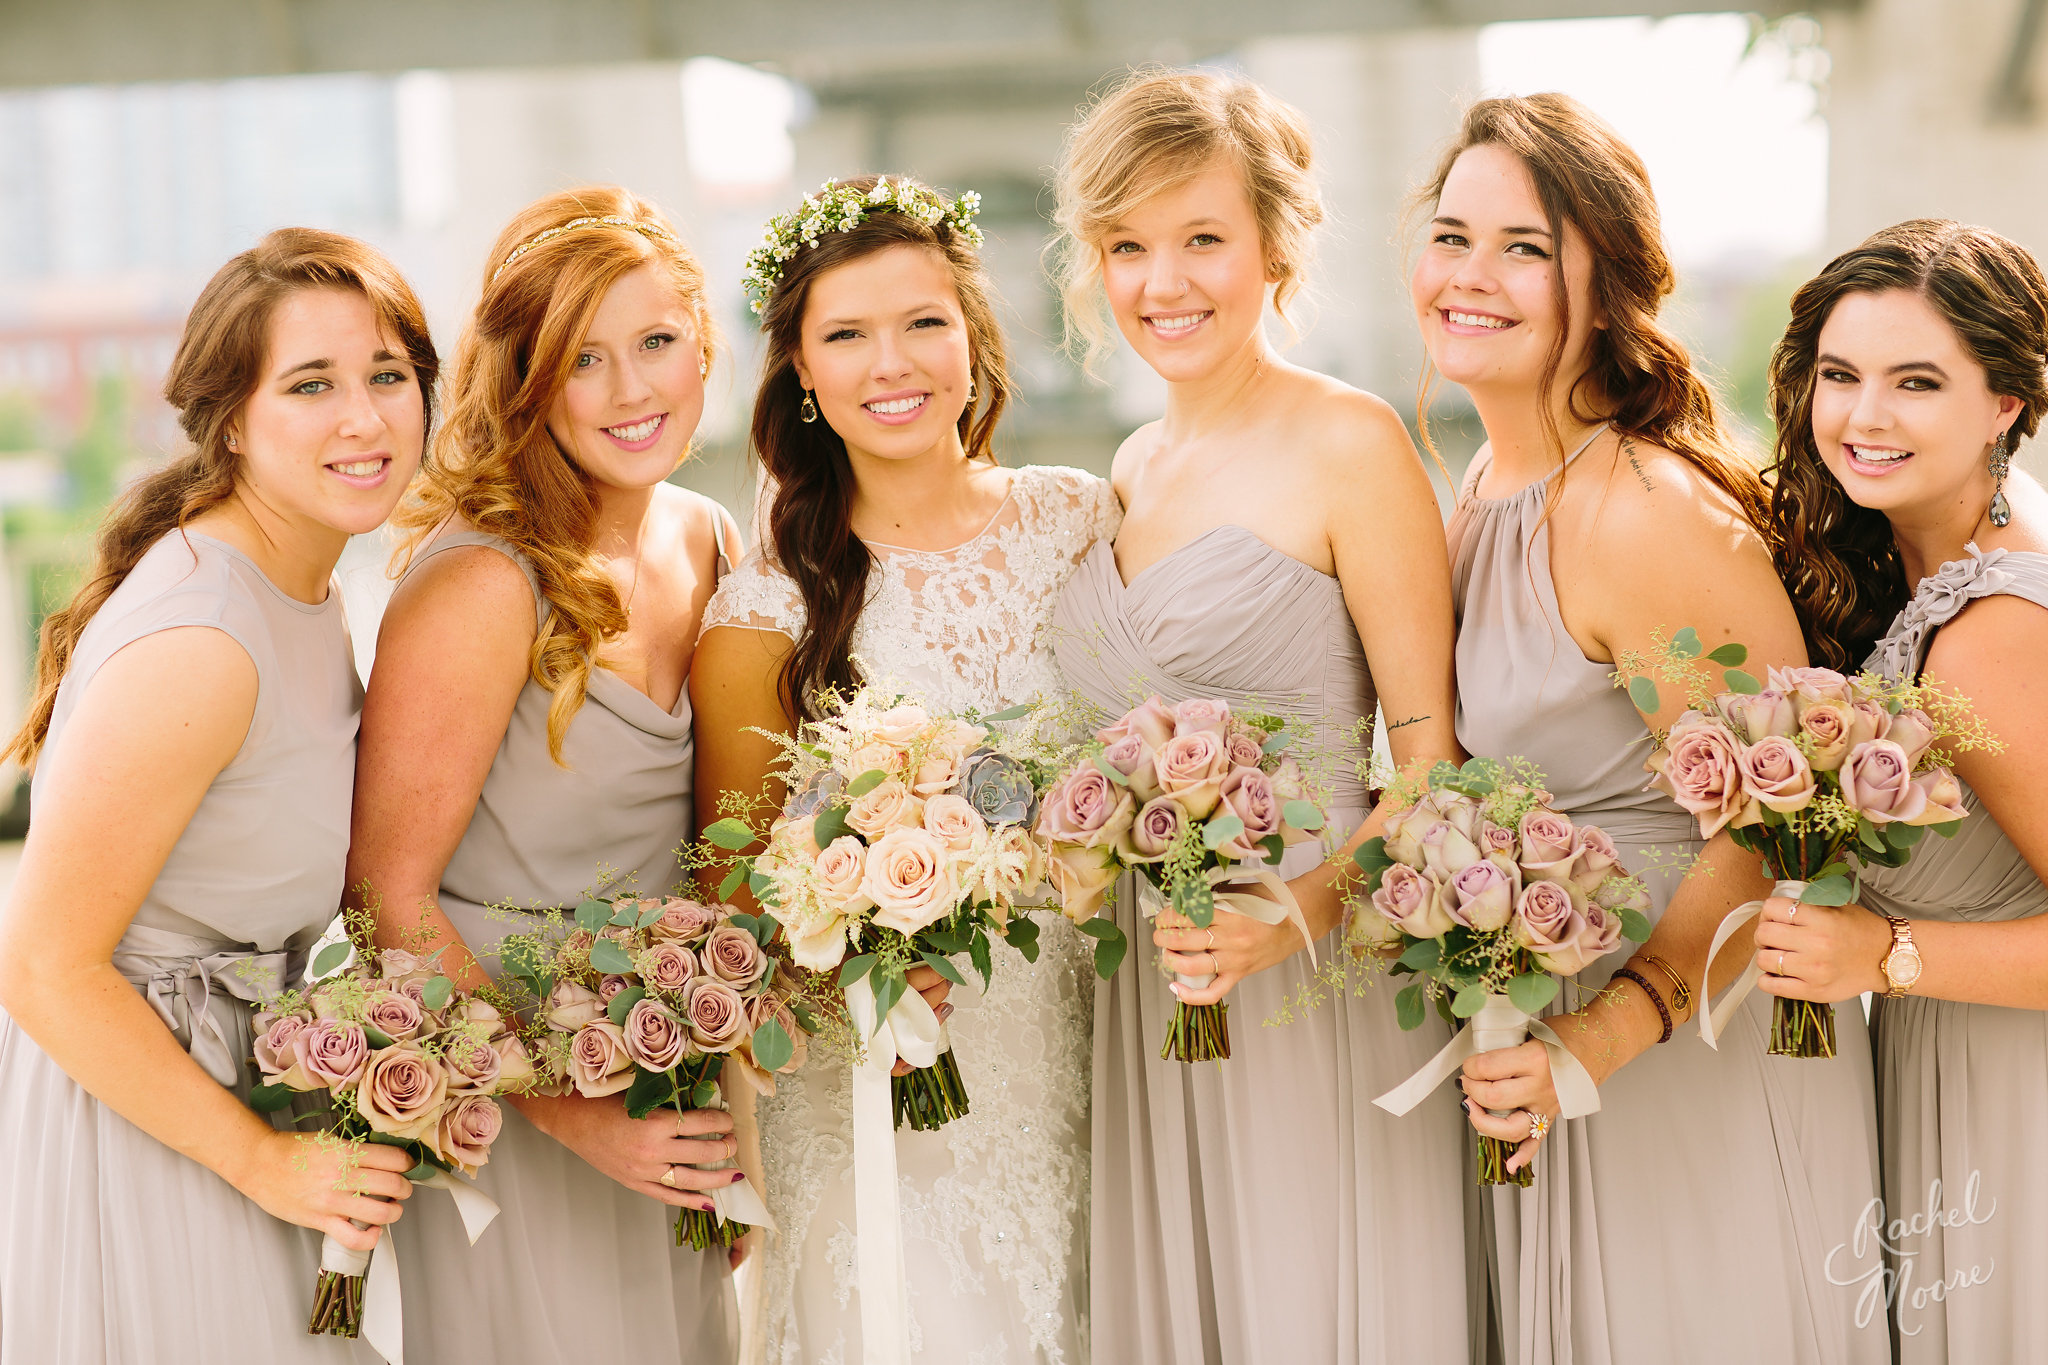 Allison with her Bridesmaids